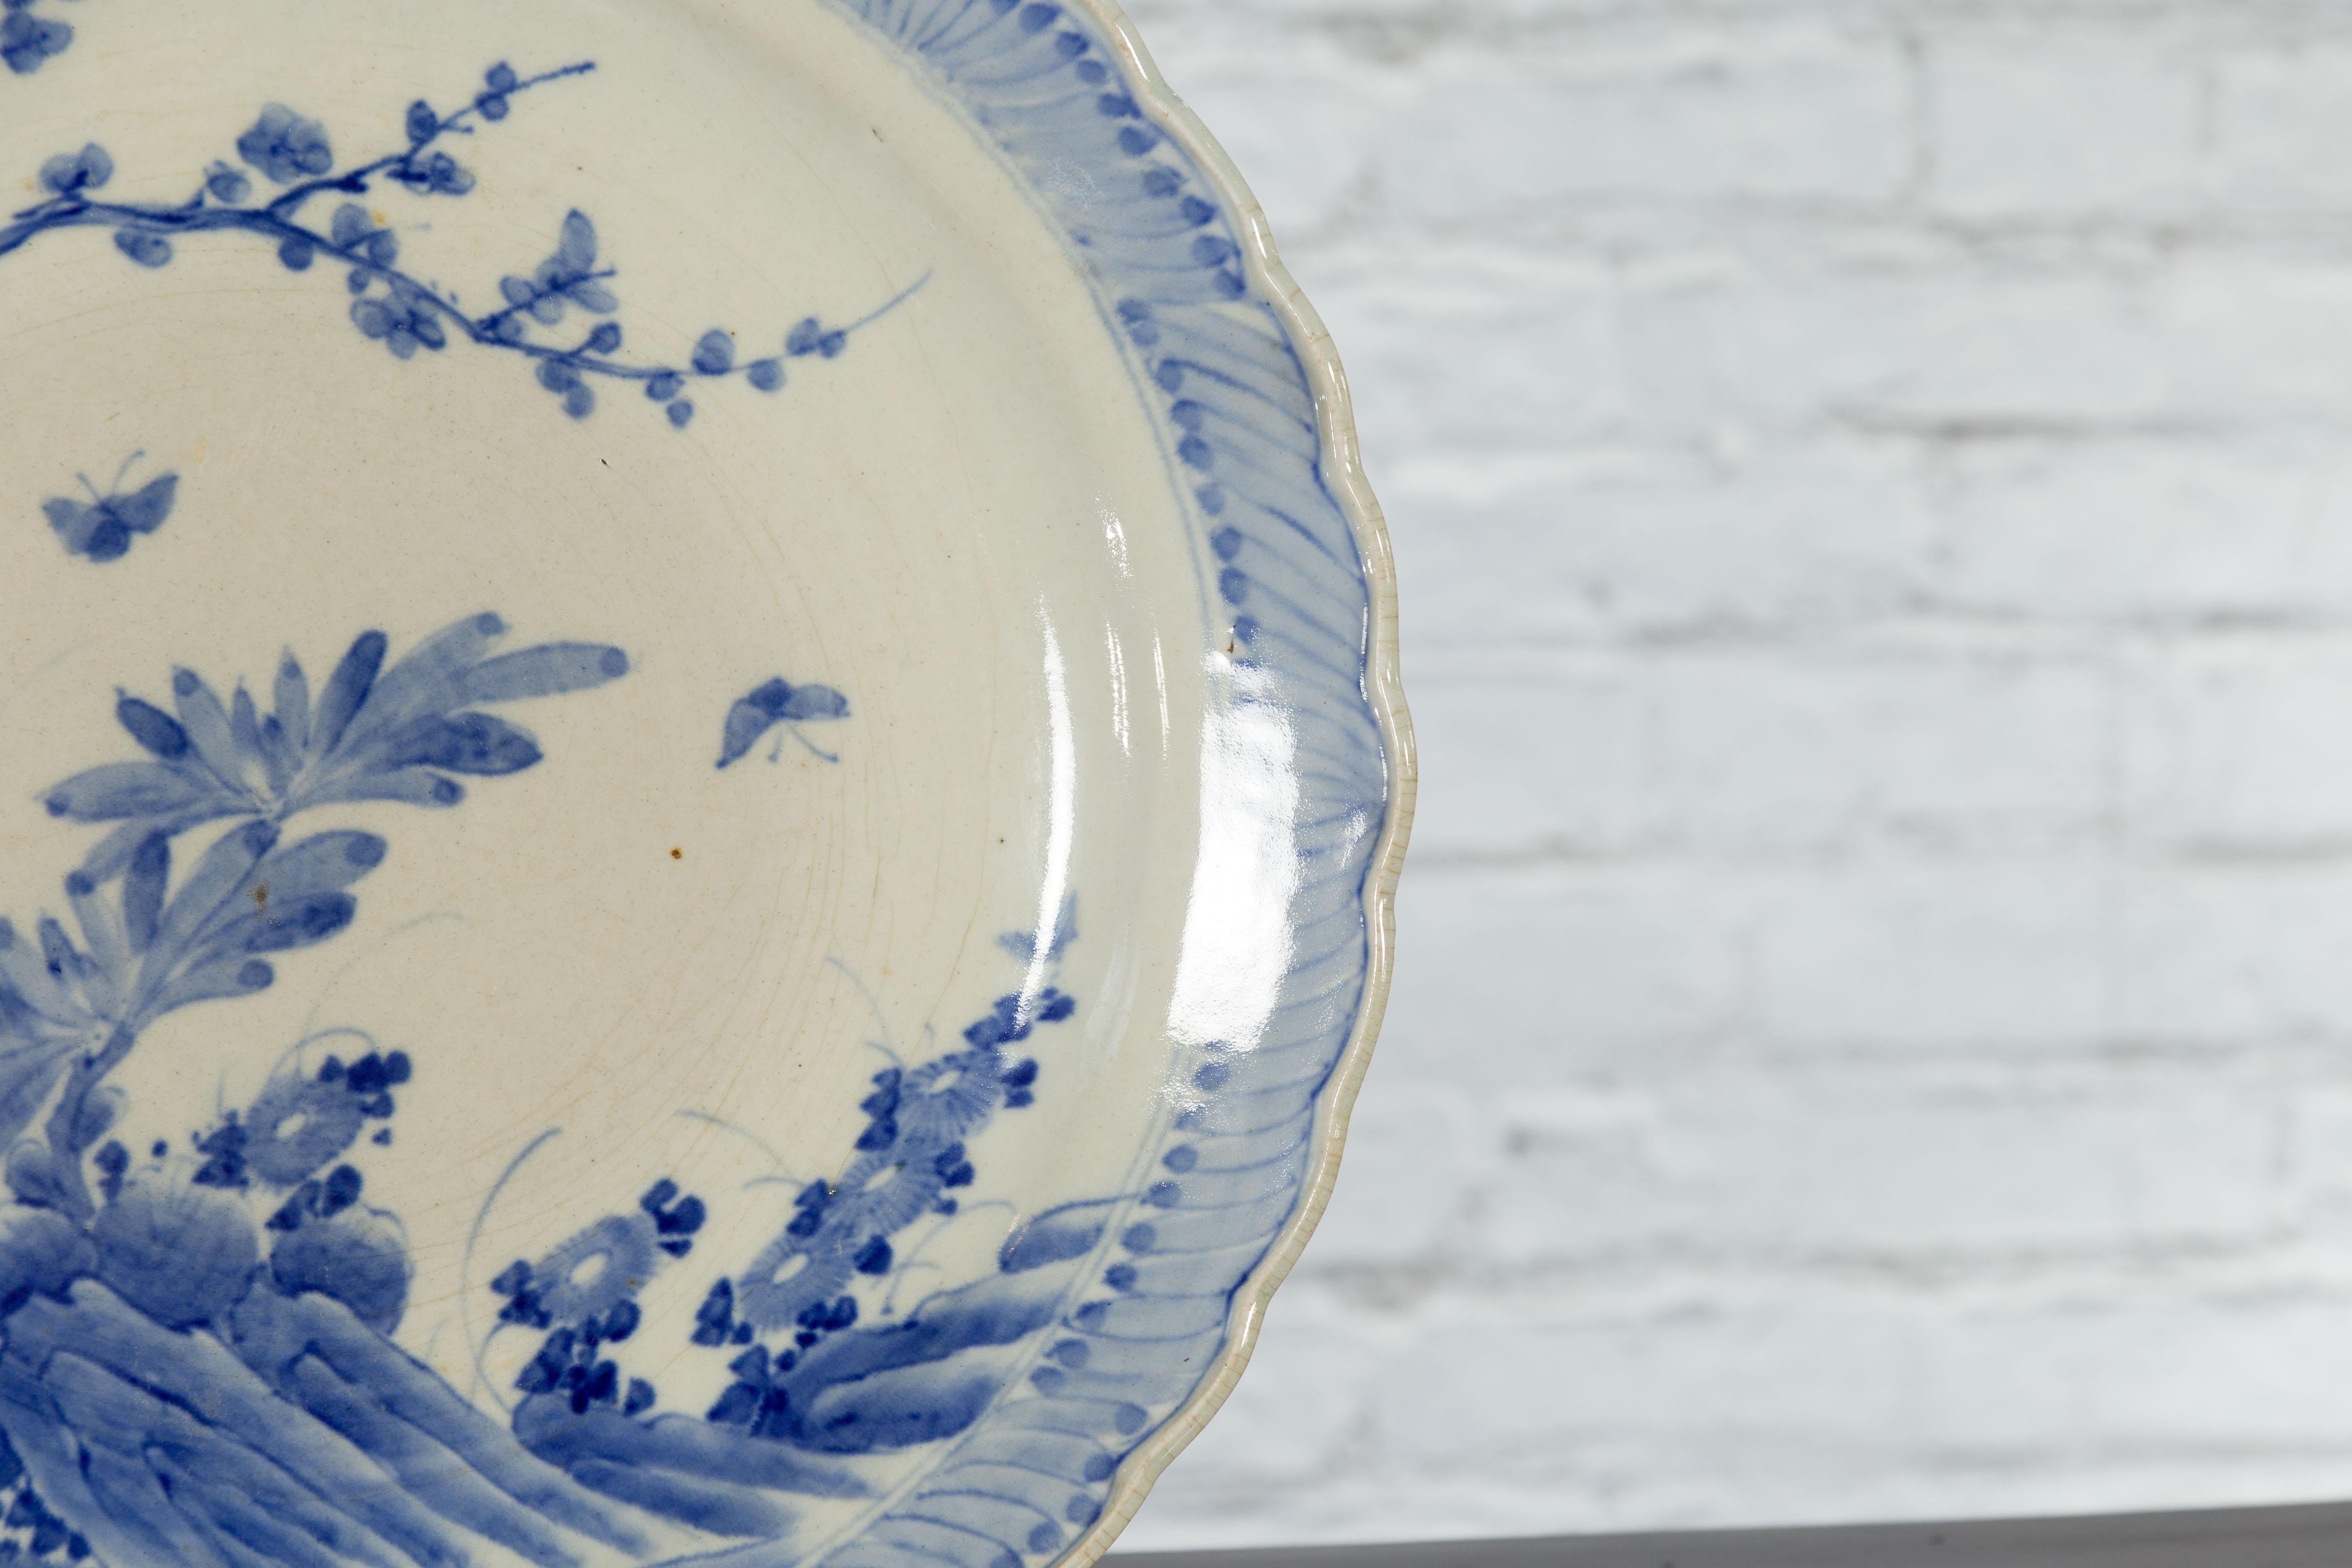 Japanese Hand-Painted Blue and White Porcelain Charger Plate with Foliage Décor For Sale 5